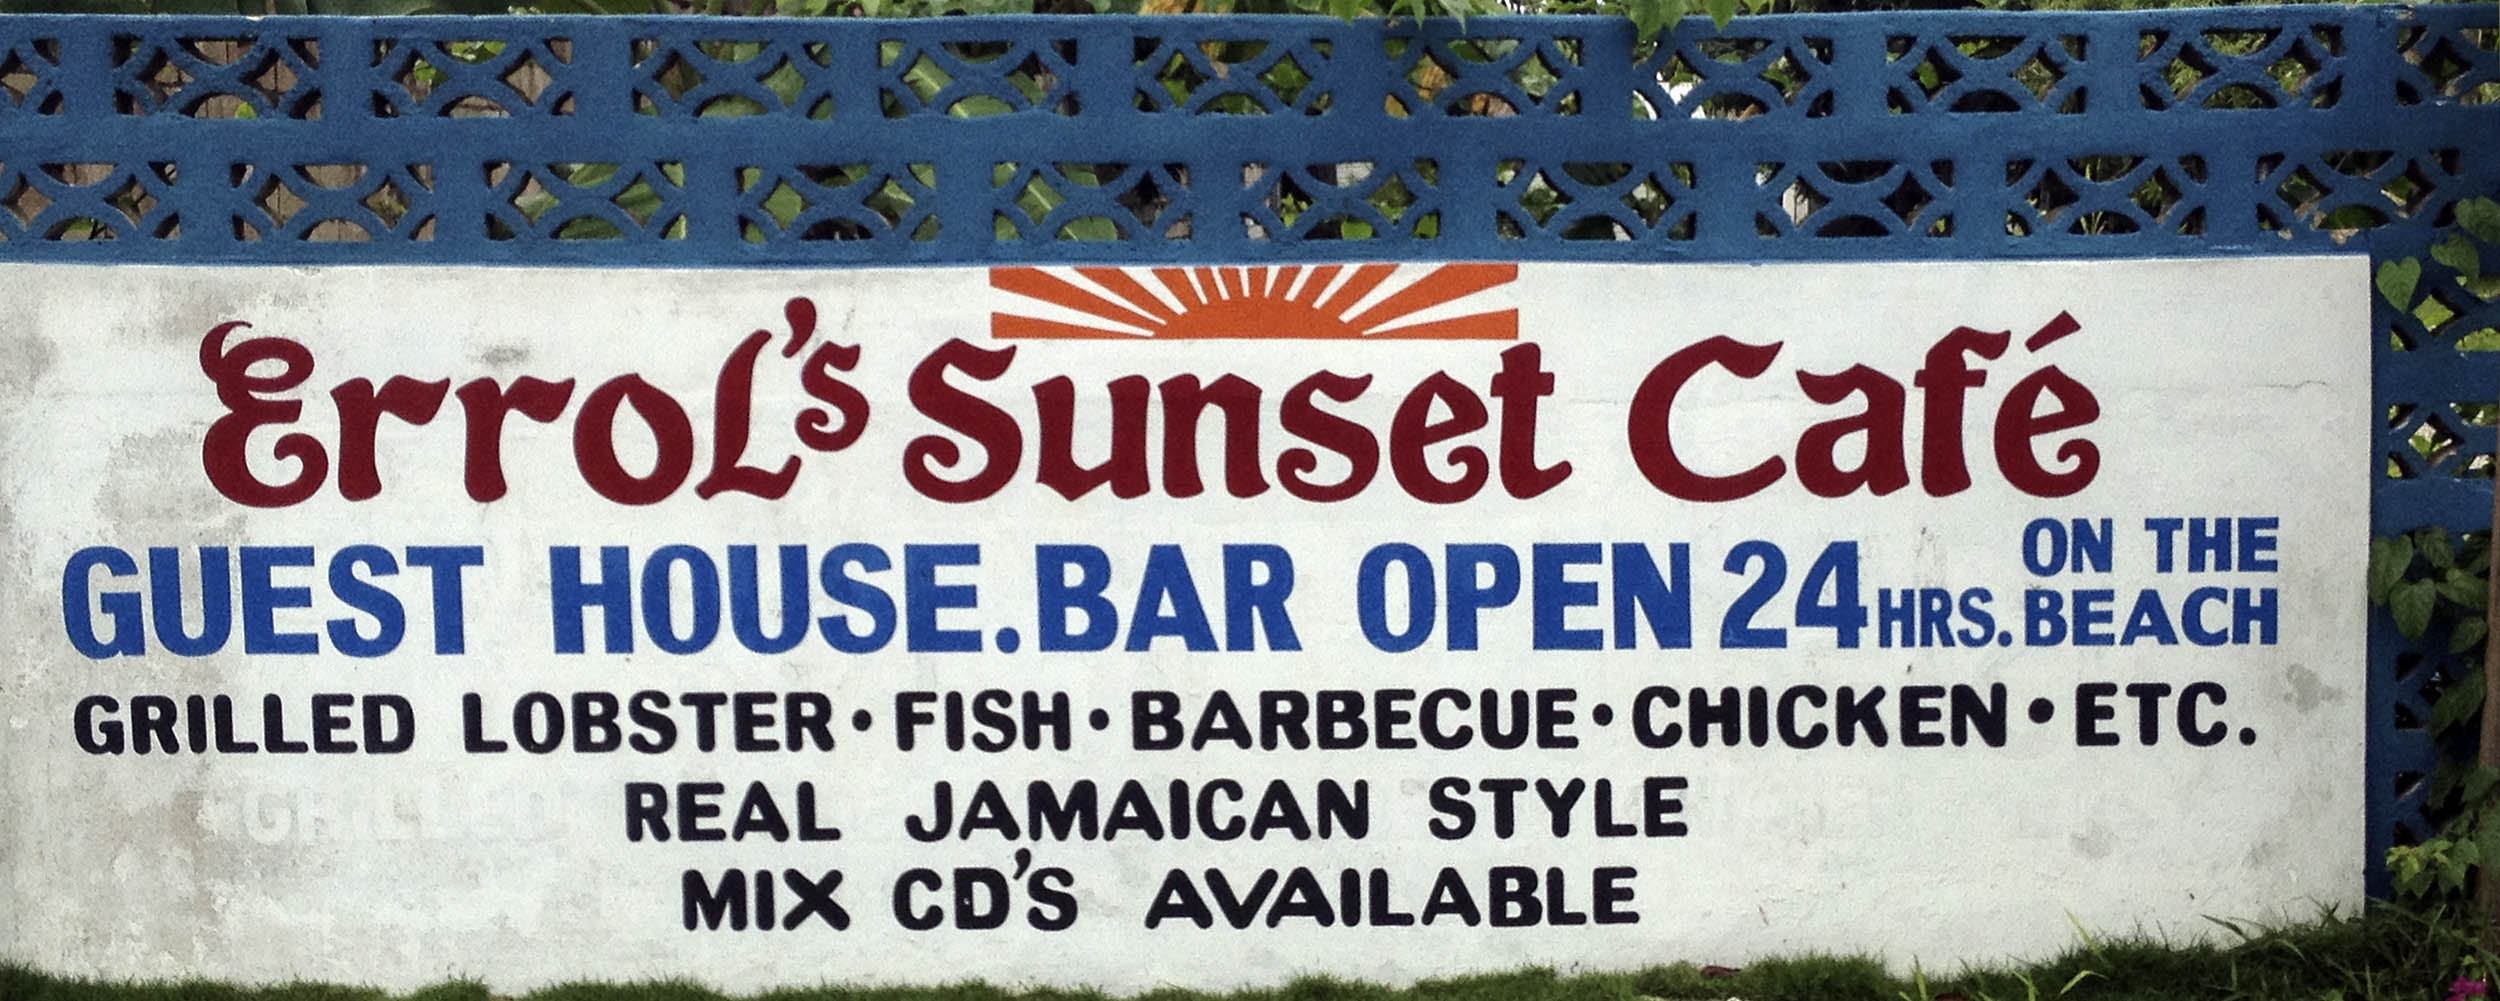 Errol's Sunset Cafe and Guest House - Negril Jamaica